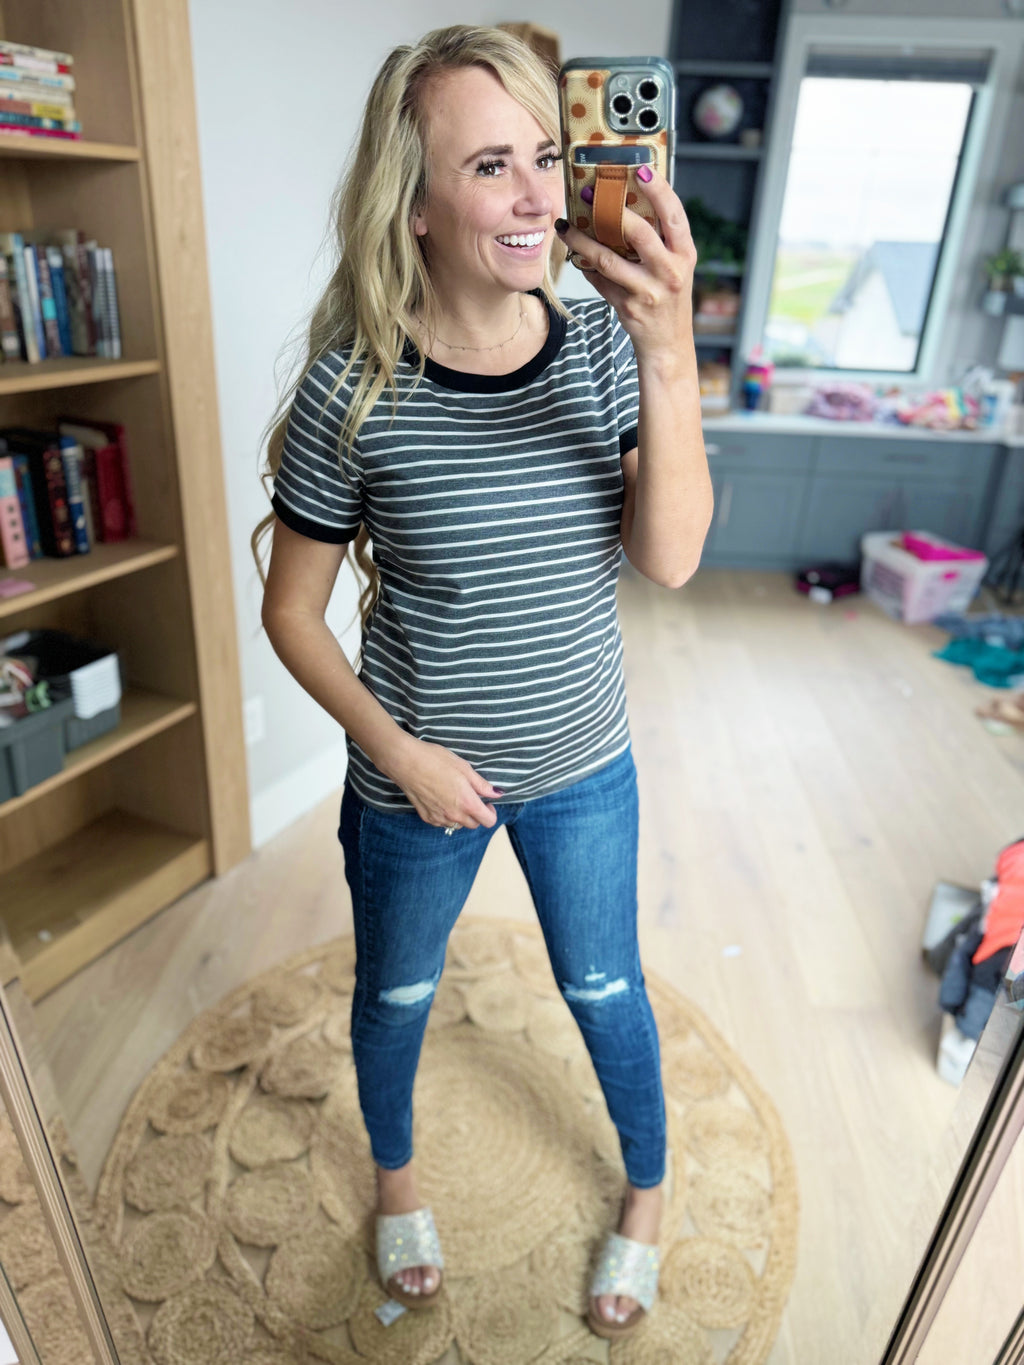 Different Terry Striped Top in Charcoal